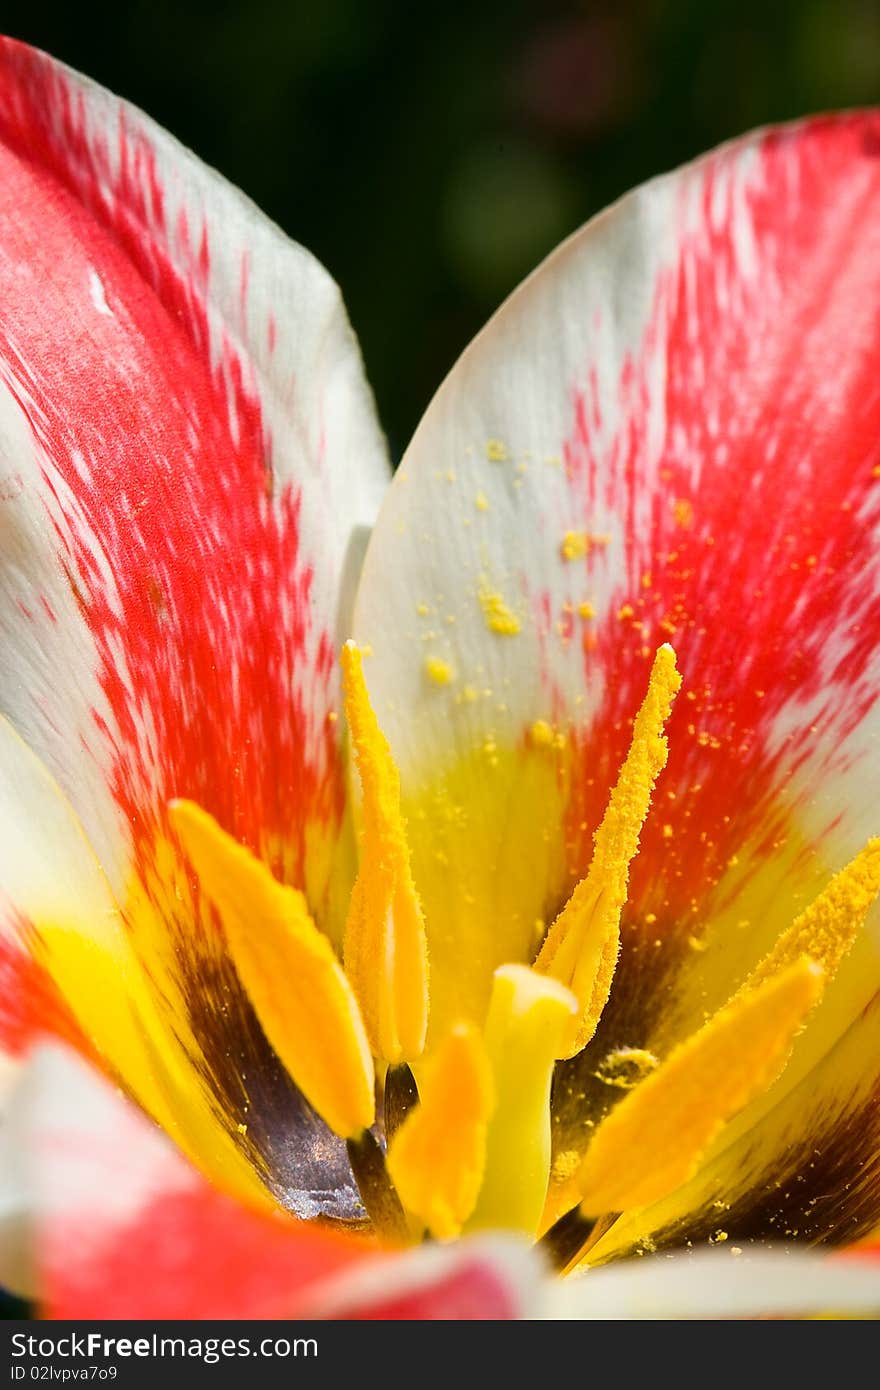 Tulip close up with yellow stamen